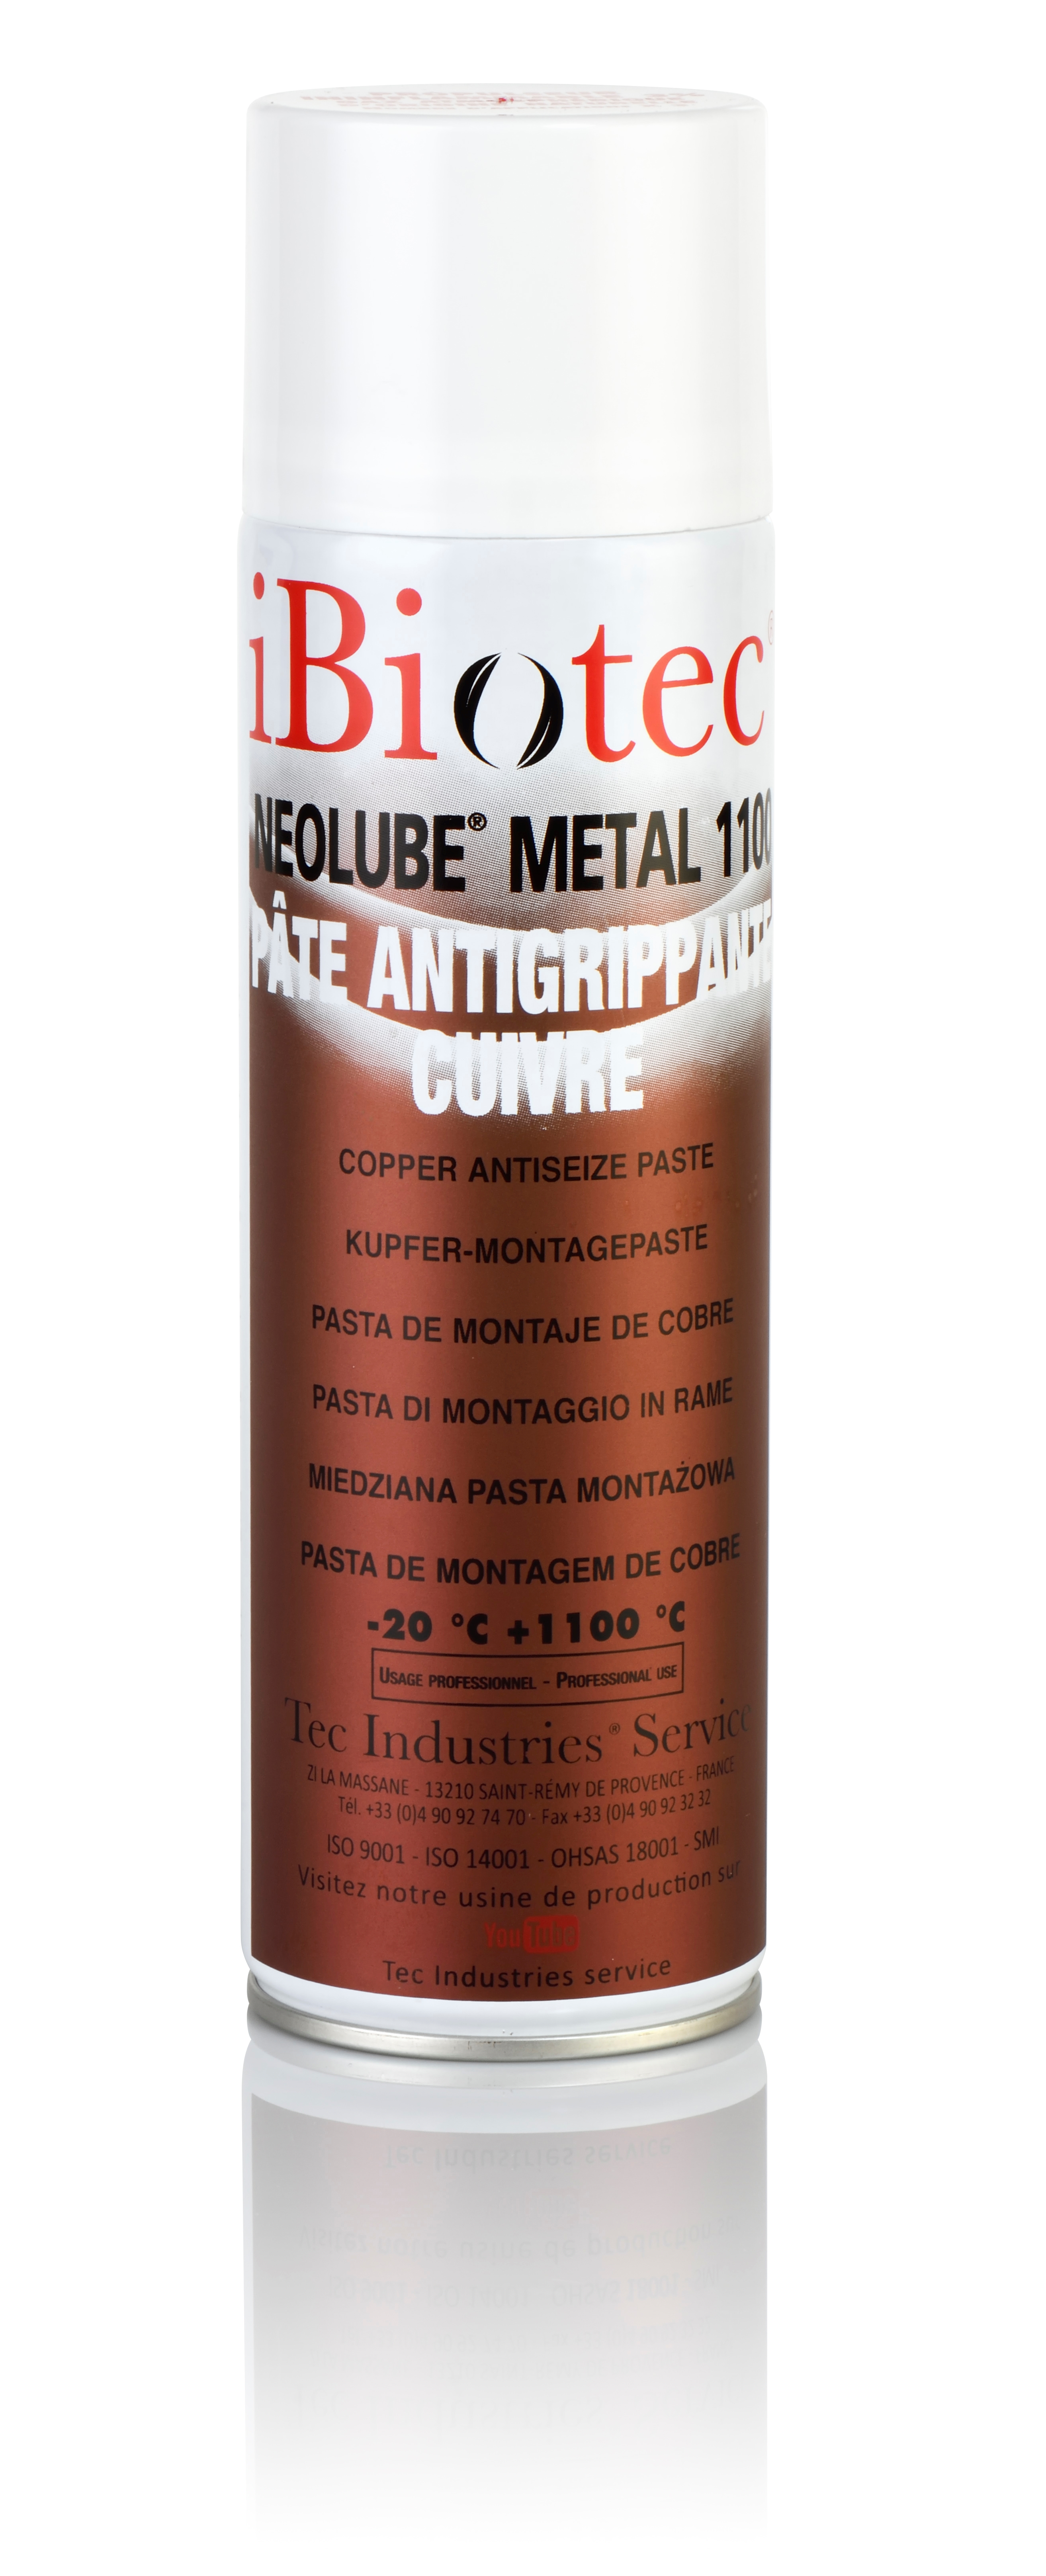 Copper grease, copper anti seize, copper anti seize spray, copper antiseize lubricant, copper anti seize ibiotec, assembly compound, copper compound, drills grease, Electric contact grease, copper grease for very high temperatures 1100°C. anti-corrosion. weld-resistant enabling disassembly. compliant with MIL A 907 ED specifications. anti-seize copper paste aerosol, copper paste, copper grease, high temperature copper grease, copper assembly paste, electrical contact grease, copper grease for brakes, copper grease for electrical contacts. high-temperature grease. very high-temperature grease. technical grease suppliers. industrial grease suppliers. industrial lubricant suppliers. technical grease manufacturers. industrial grease manufacturers. industrial lubricant manufacturers. 